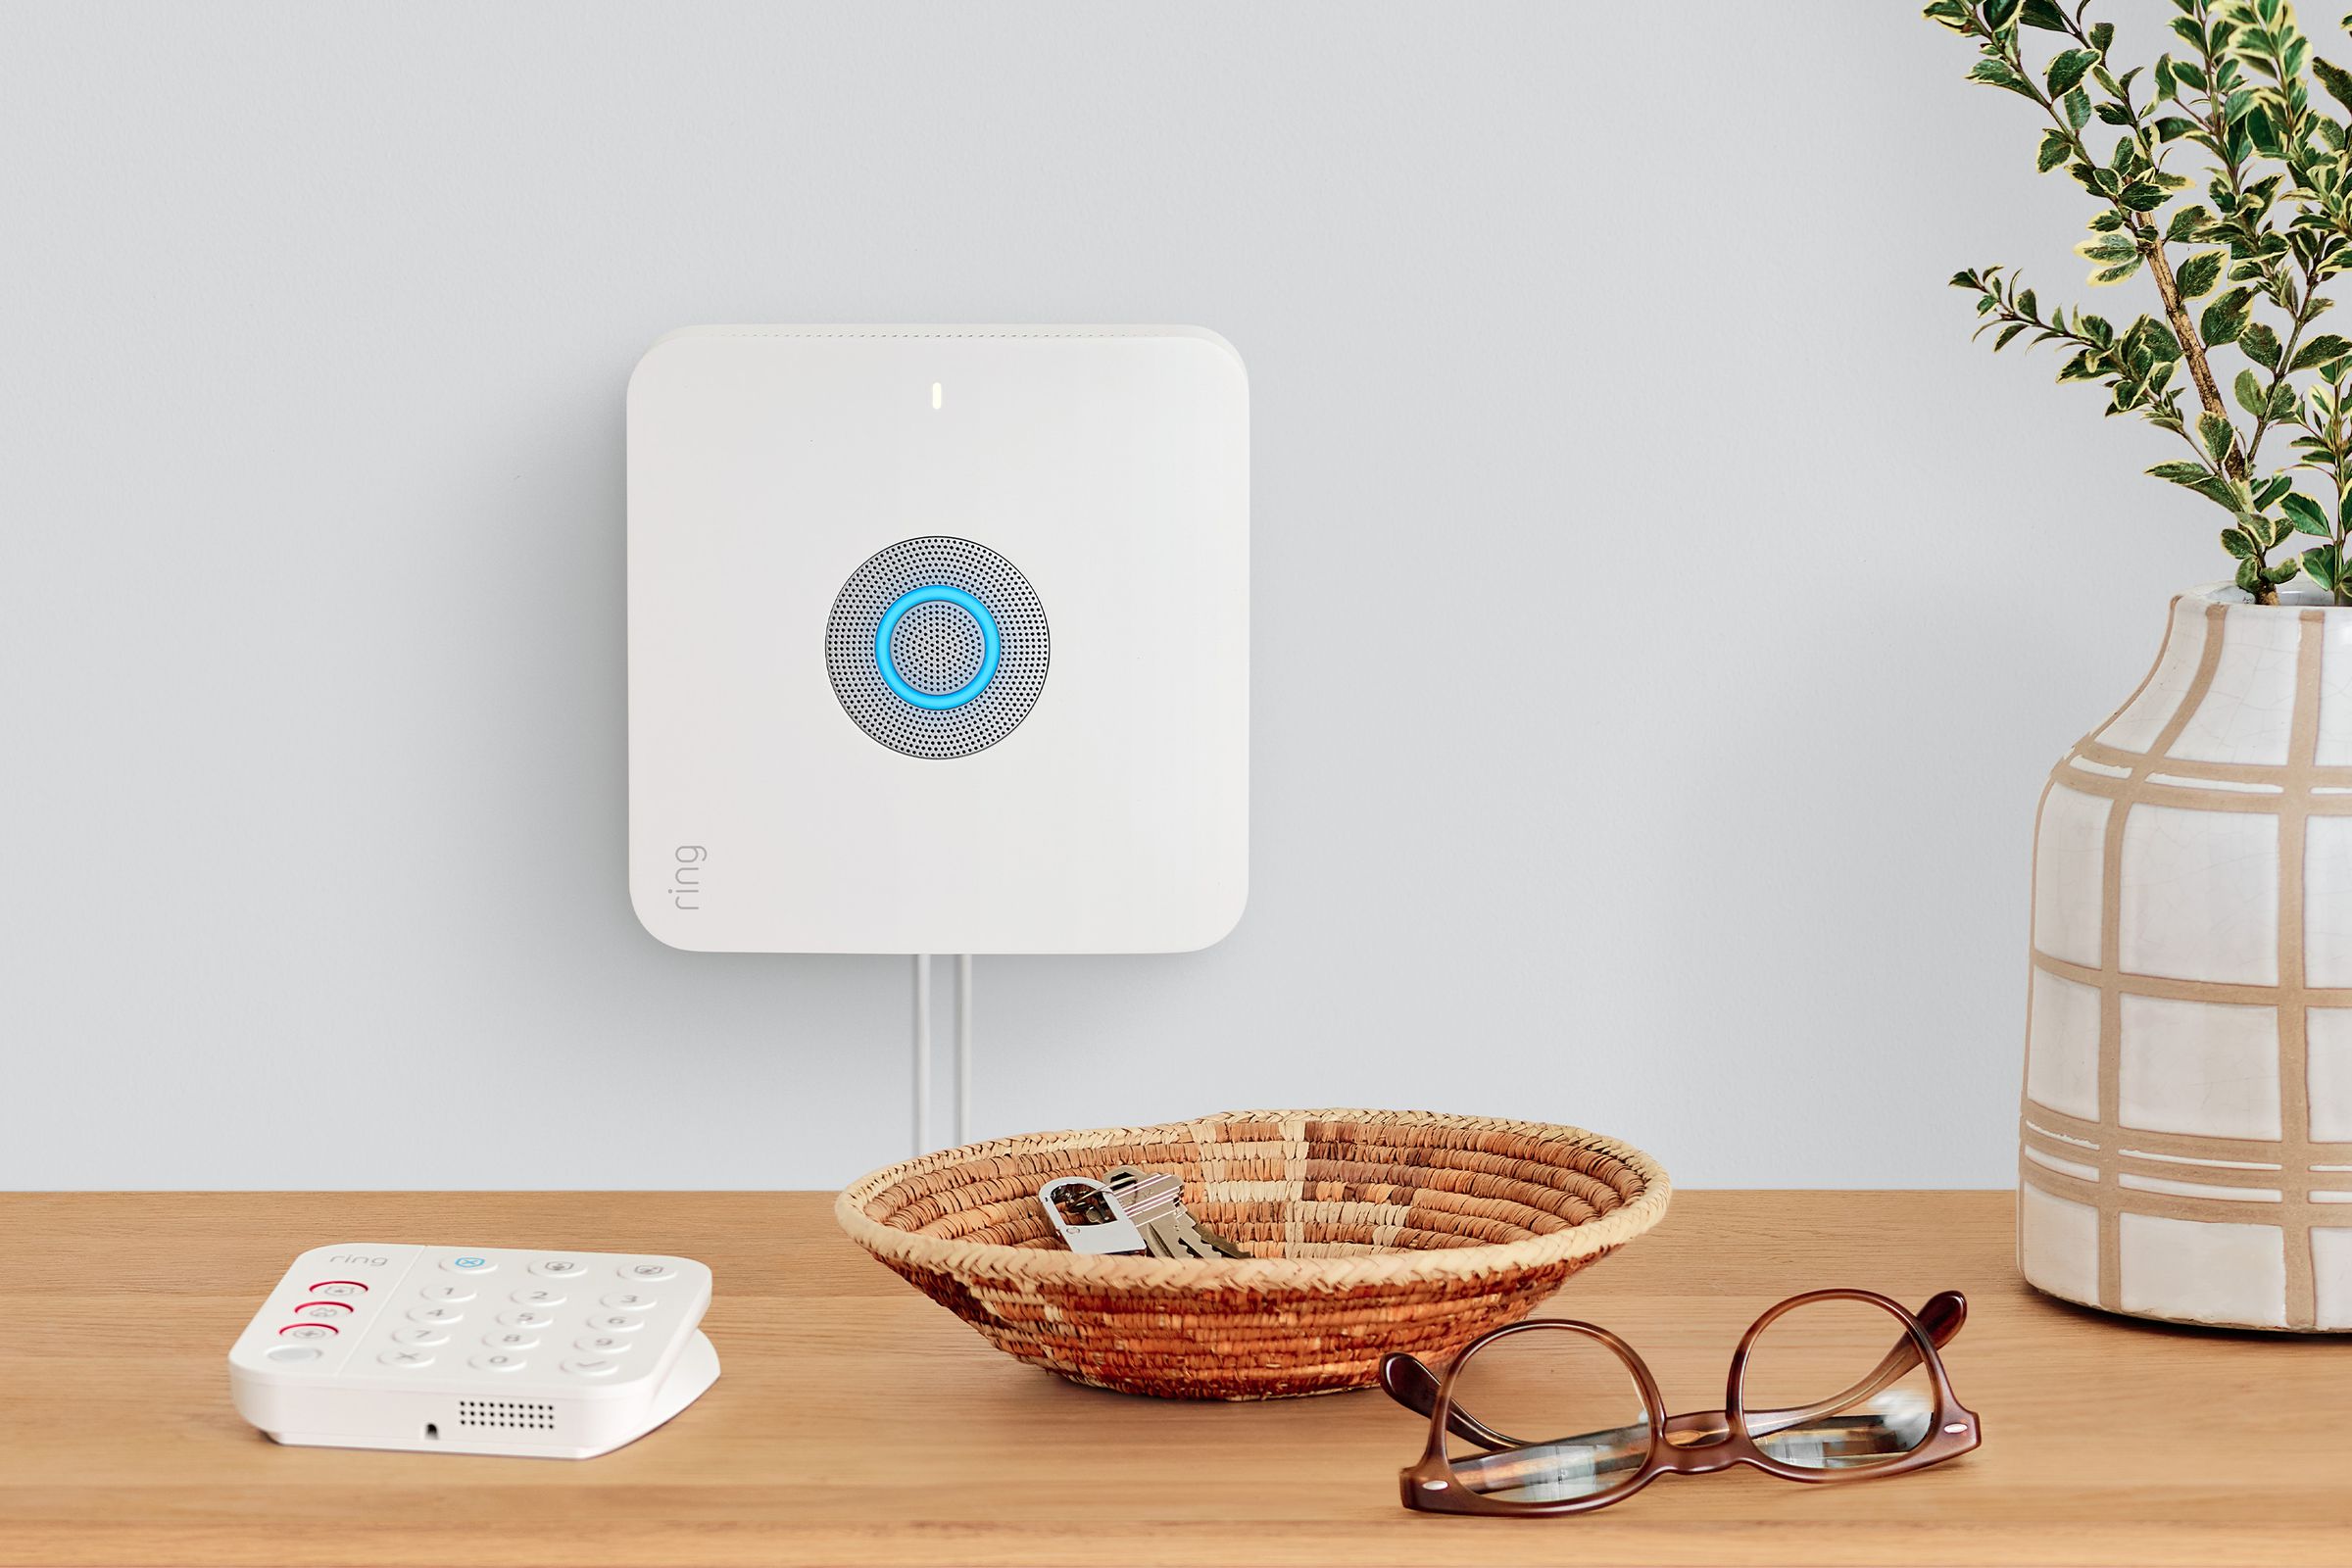 The Ring Alarm Pro is the latest generation of Ring’s home security system and features a built-in Eero mesh Wi-Fi router.